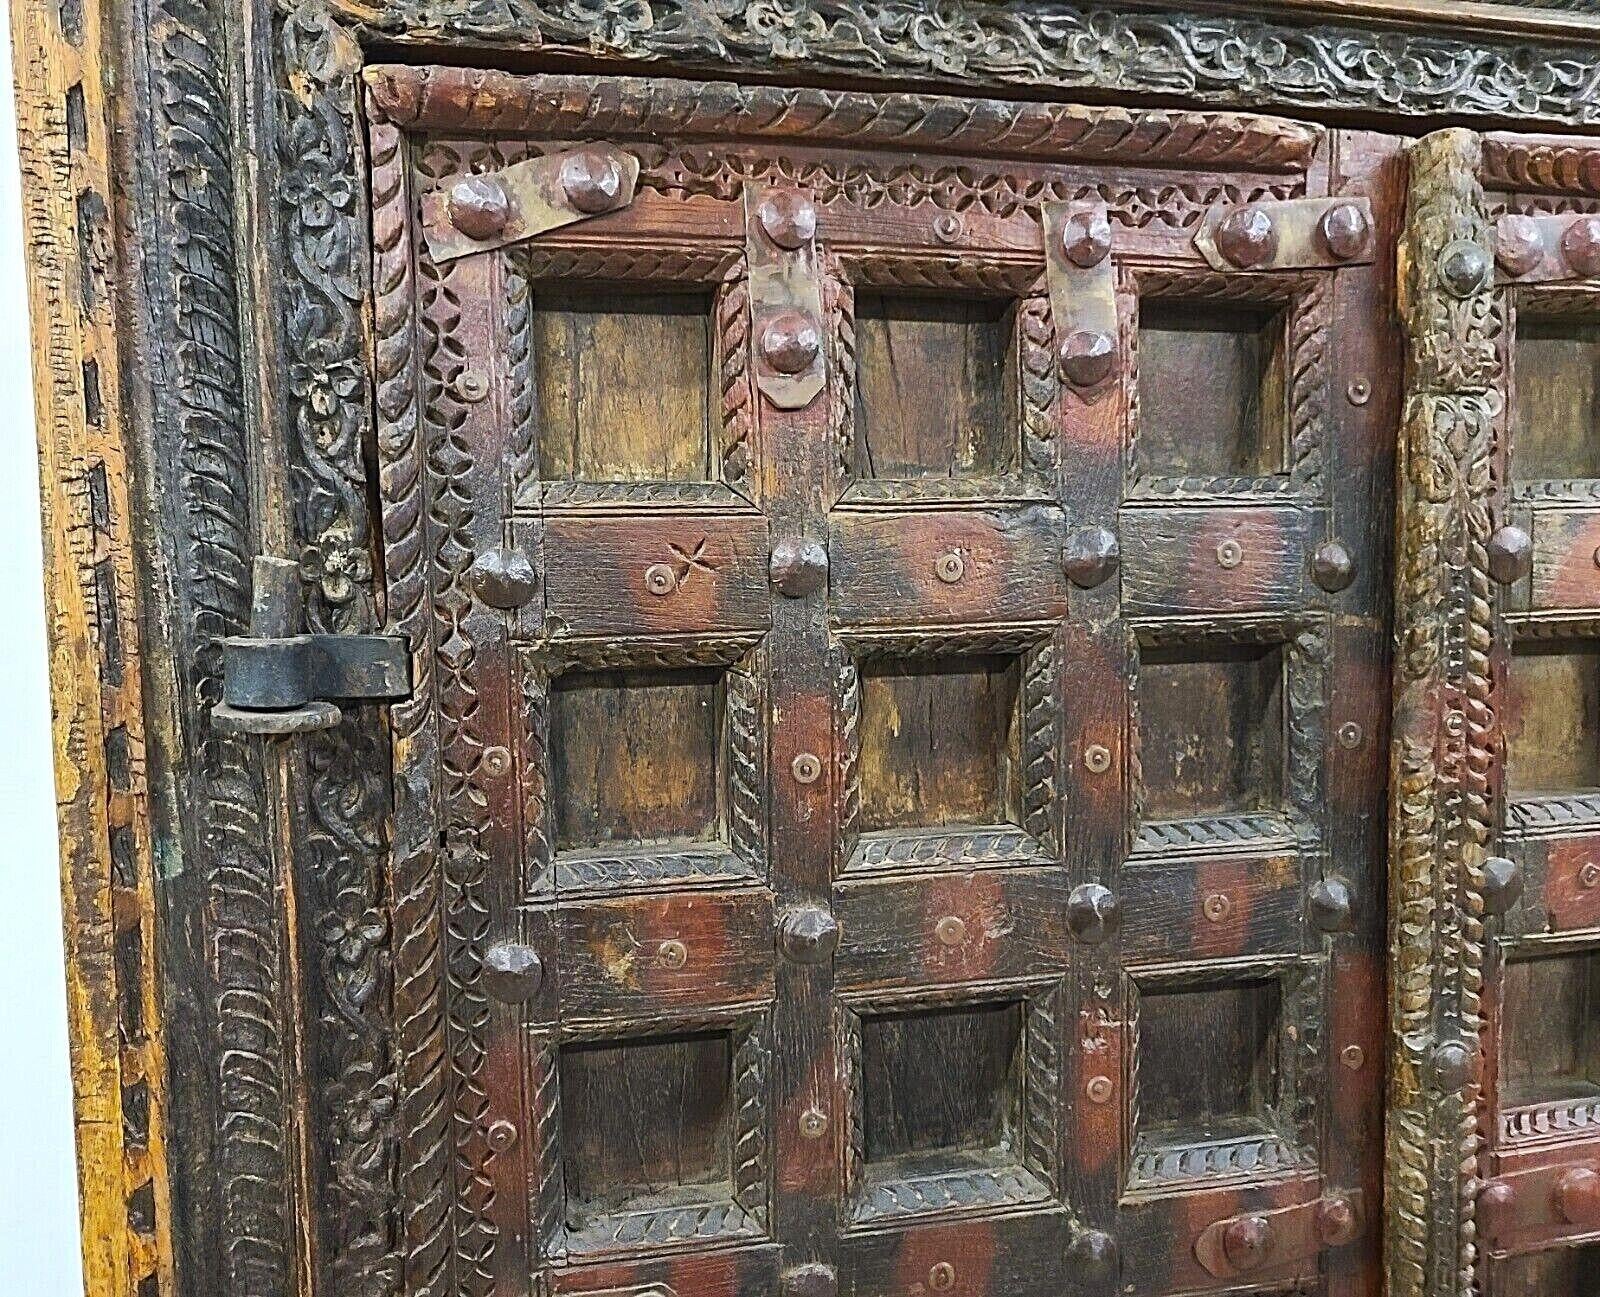 For FULL item description be sure to click on CONTINUE READING at the bottom of this listing.

Offering one of our recent palm beach estate fine furniture acquisitions of a
huge antique 1800s Indian teak armoire cabinet pantry with carved